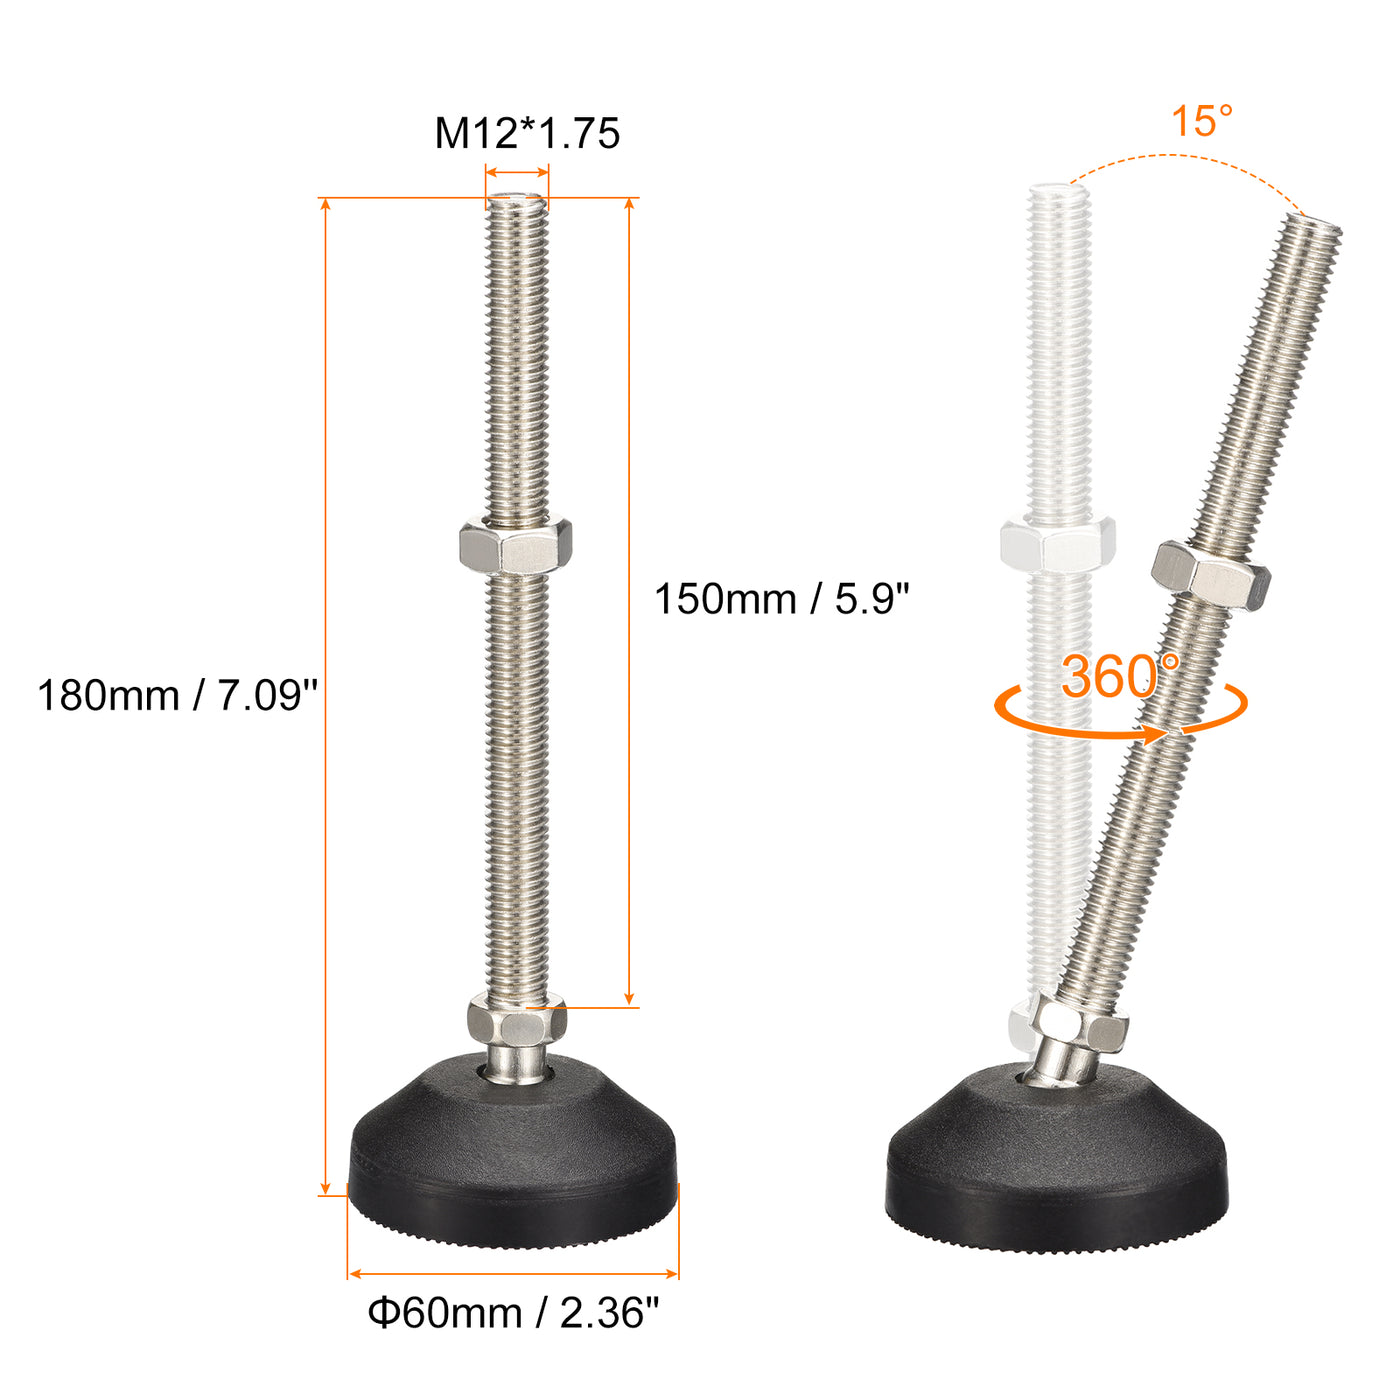 uxcell Uxcell Furniture Levelers, 1Pcs M12x150x60mm Nylon Universal Leveling Feet, Adjustable Swivel Table Feet for Furniture Workshop Machines Machinery Equipment